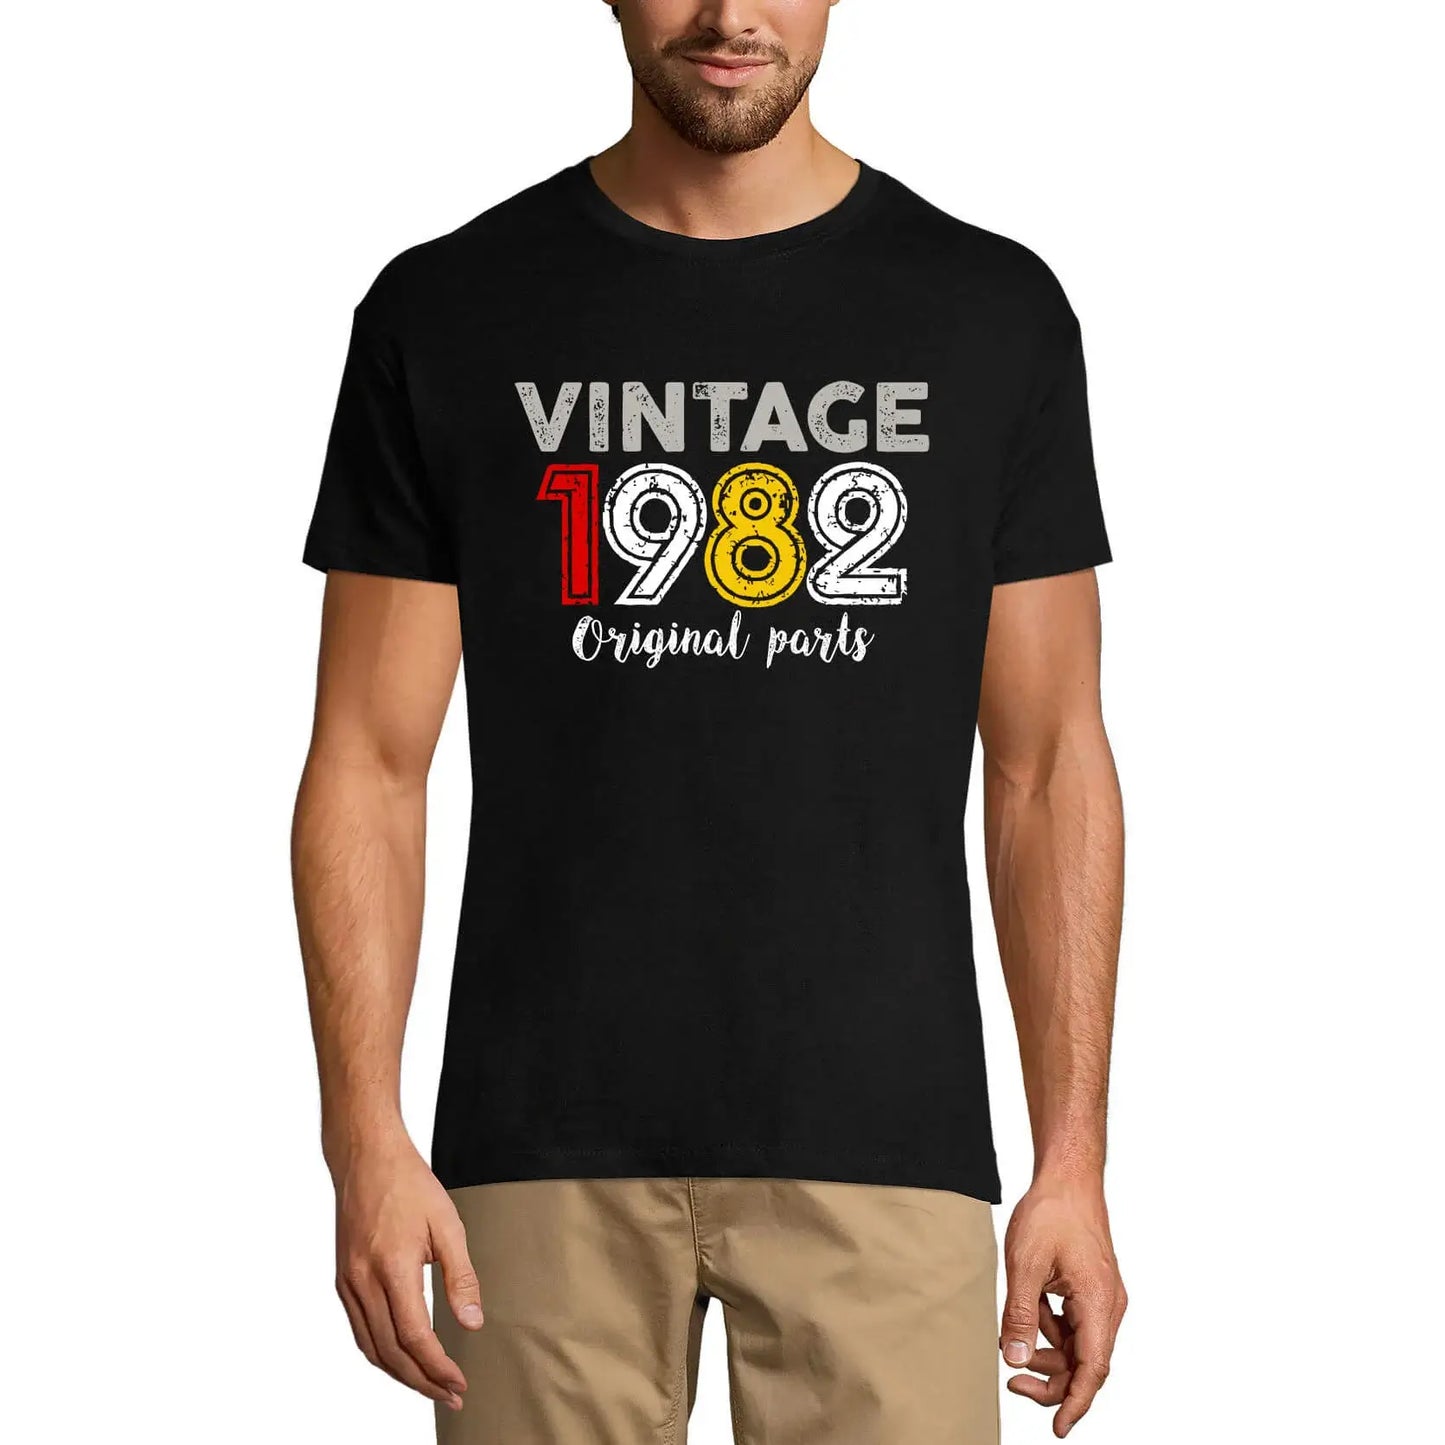 Men's Graphic T-Shirt Original Parts 1982 42nd Birthday Anniversary 42 Year Old Gift 1982 Vintage Eco-Friendly Short Sleeve Novelty Tee